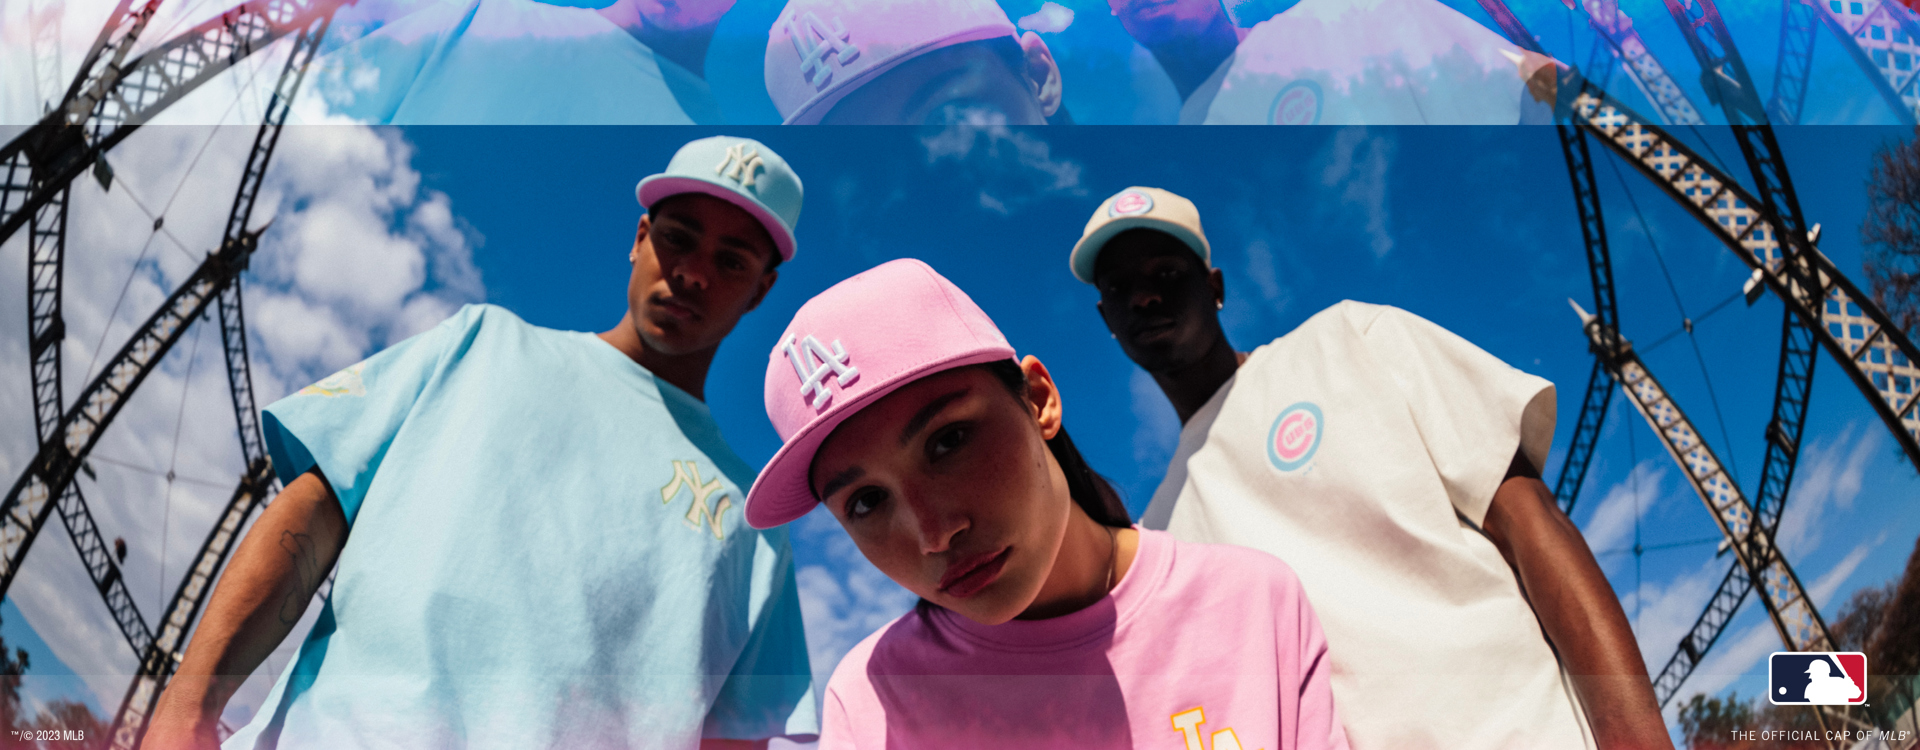 2 men and 1 woman wearing MLB apparel and caps in pastel colours.